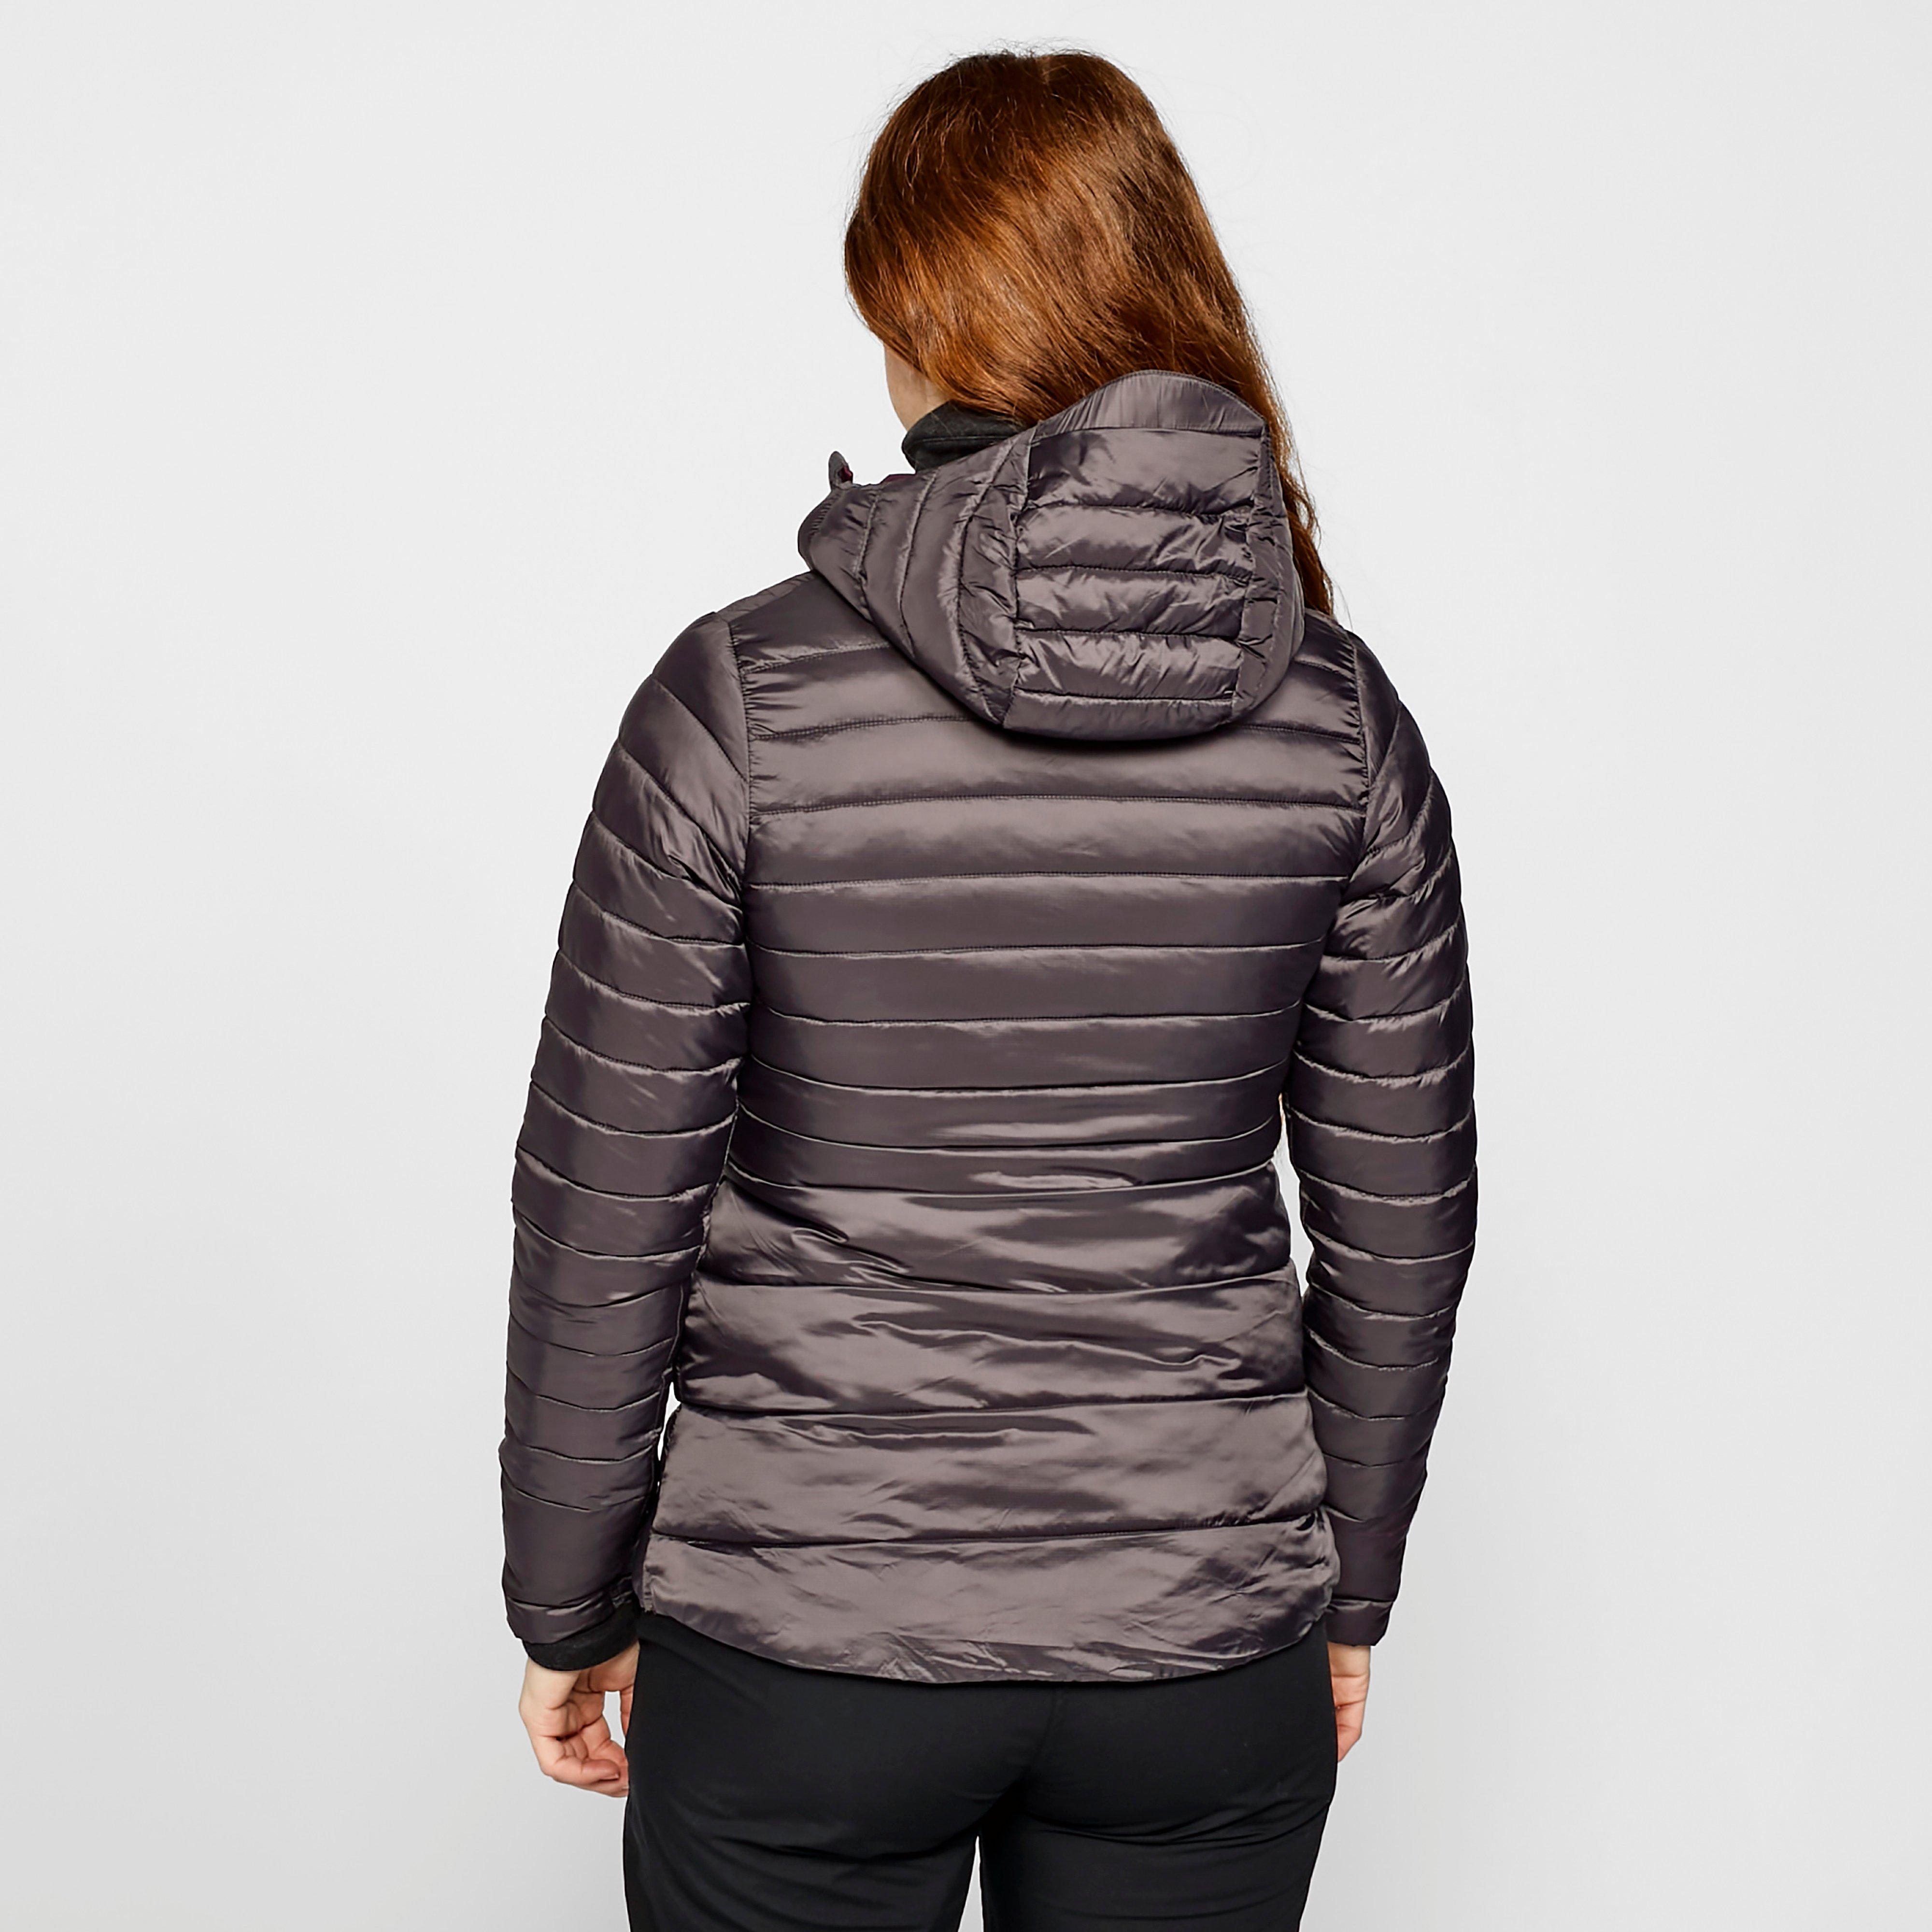 OEX Women's Idris Insulated Jacket Review